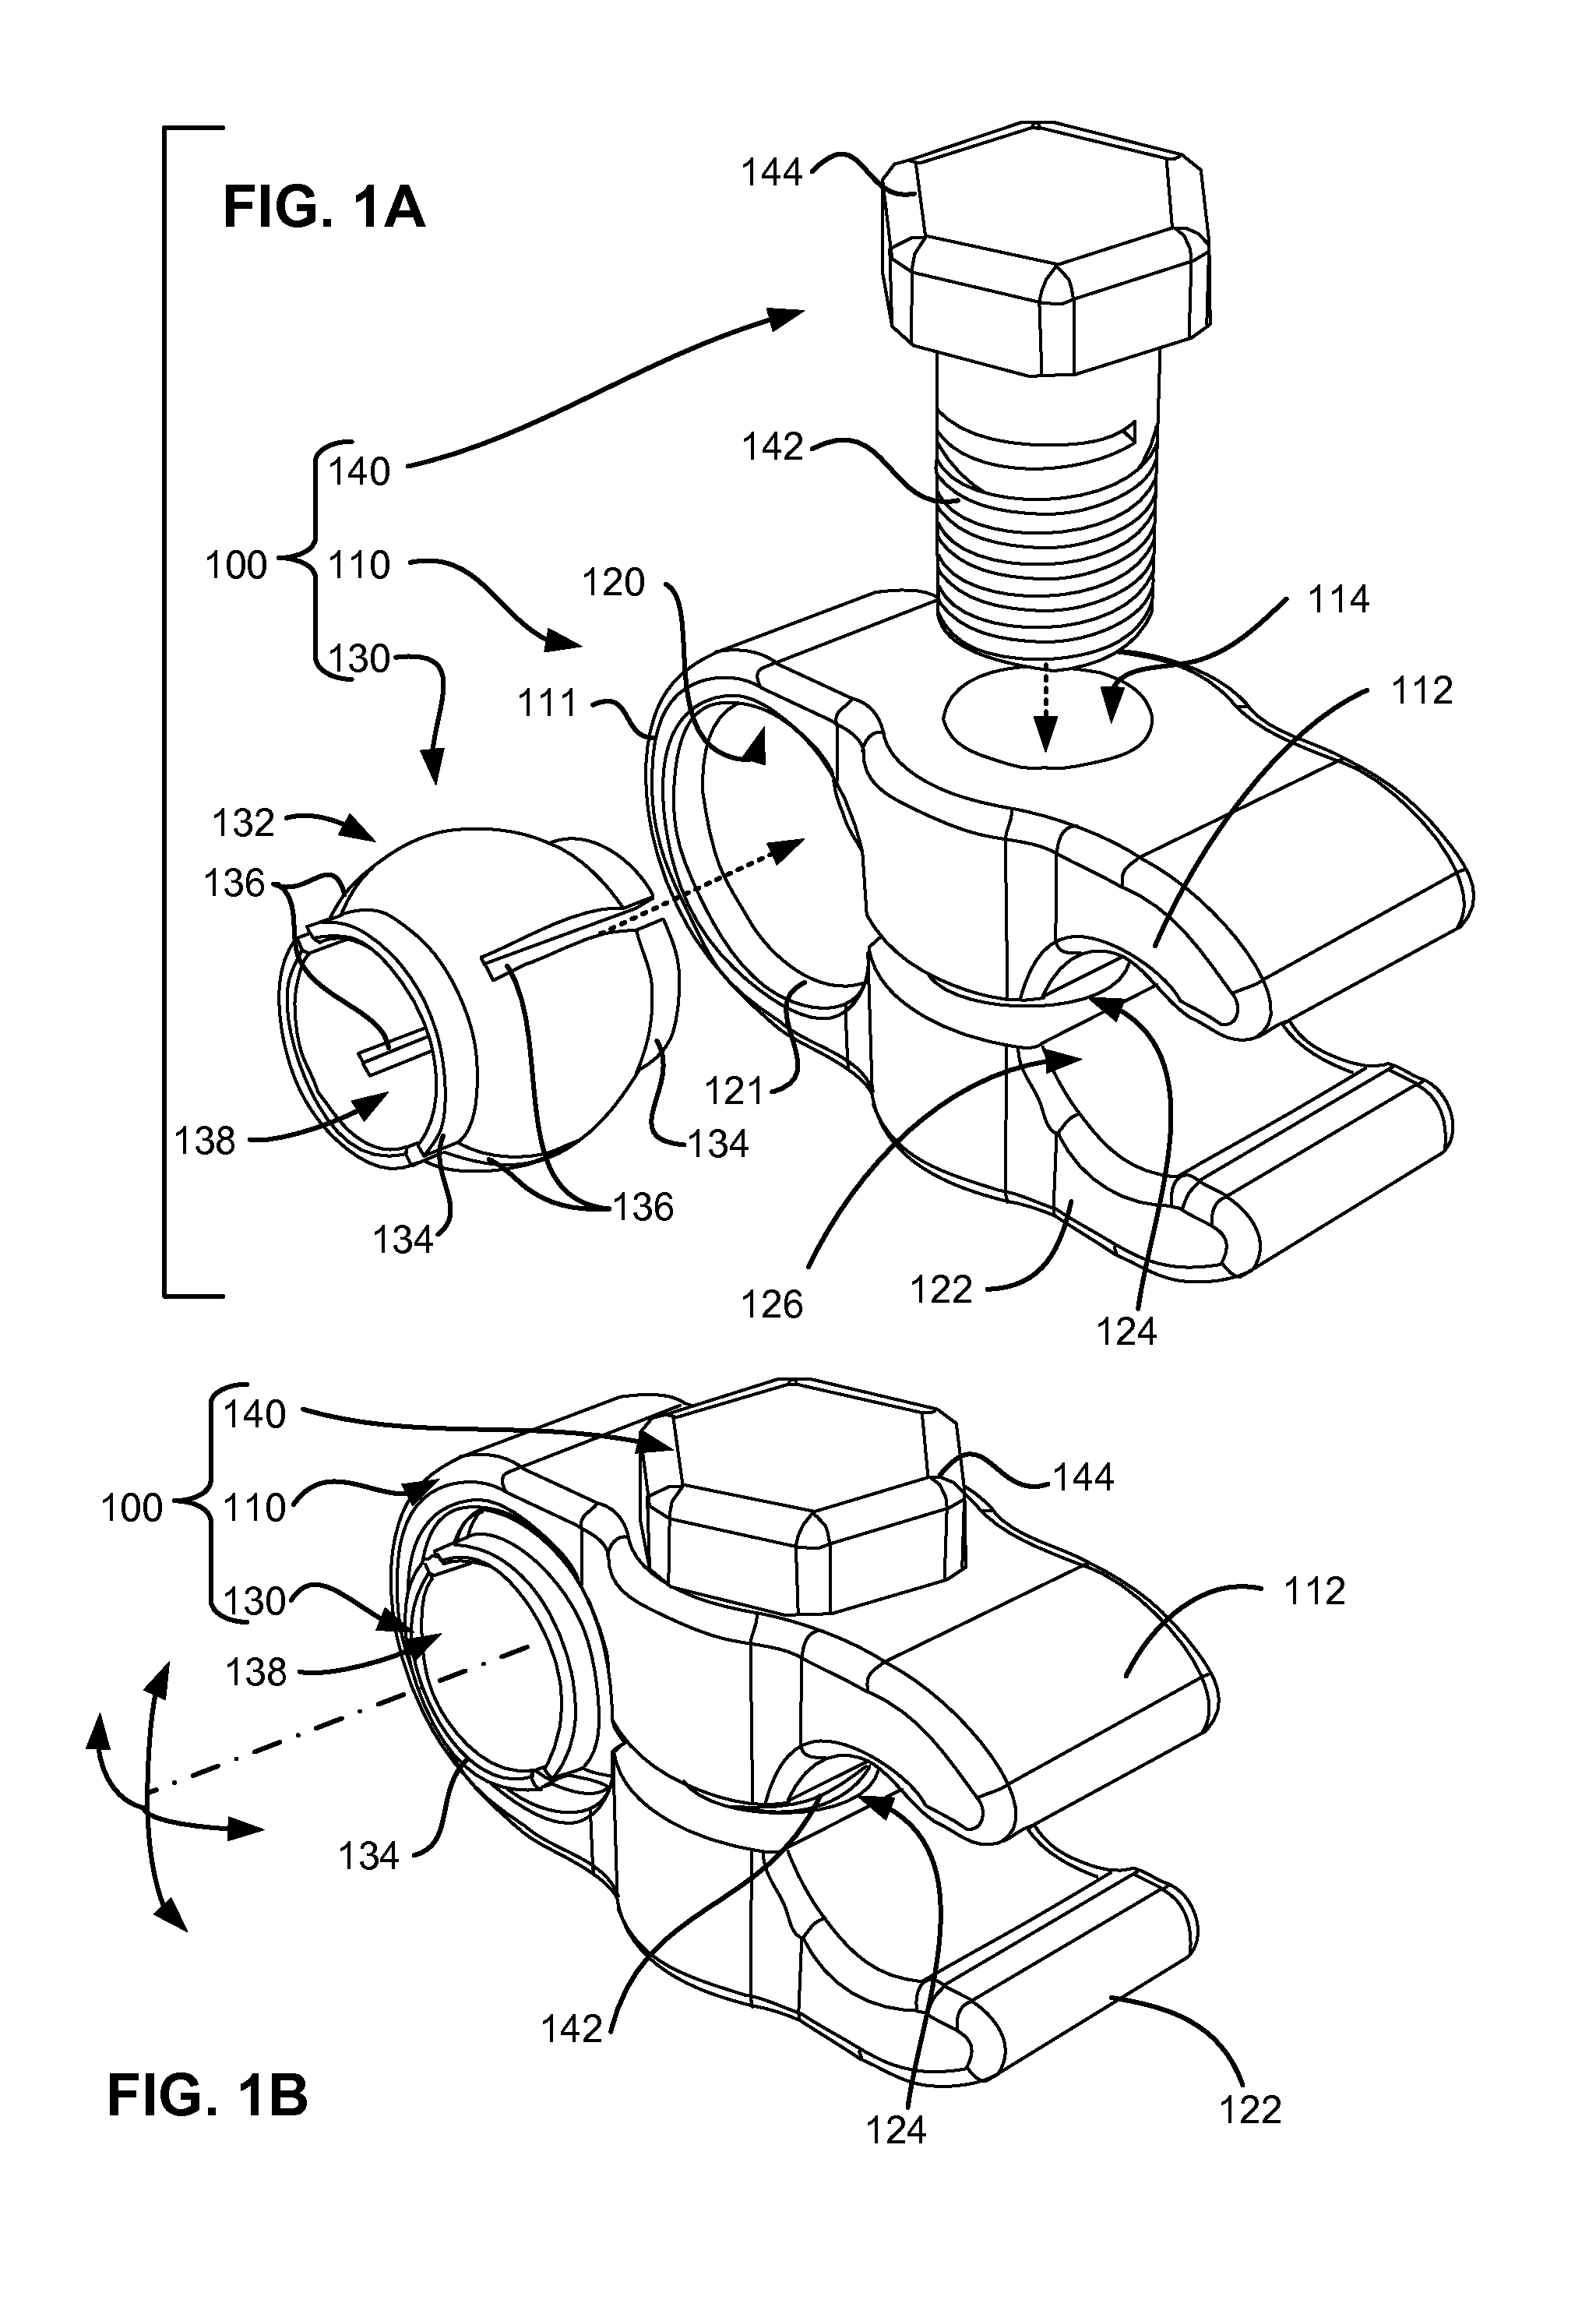 Spinal rod connectors, methods of use, and spinal prosthesis incorporating spinal rod connectors